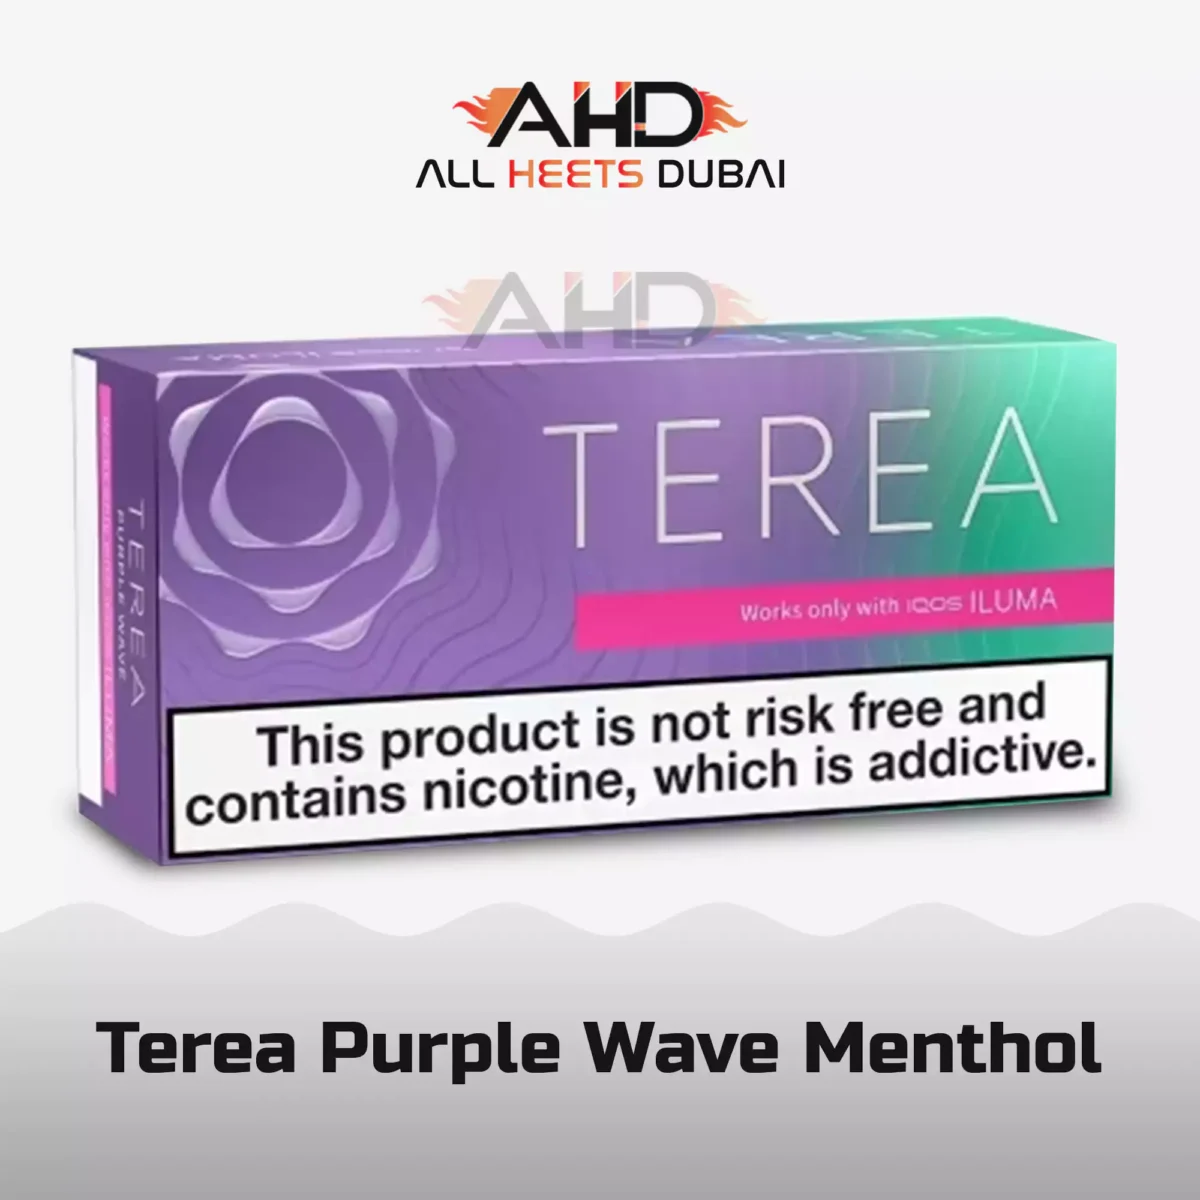 Terea Purple Wave Menthol by Italy in DUBAI 24 hour Delivery in on the other Area of UAE .